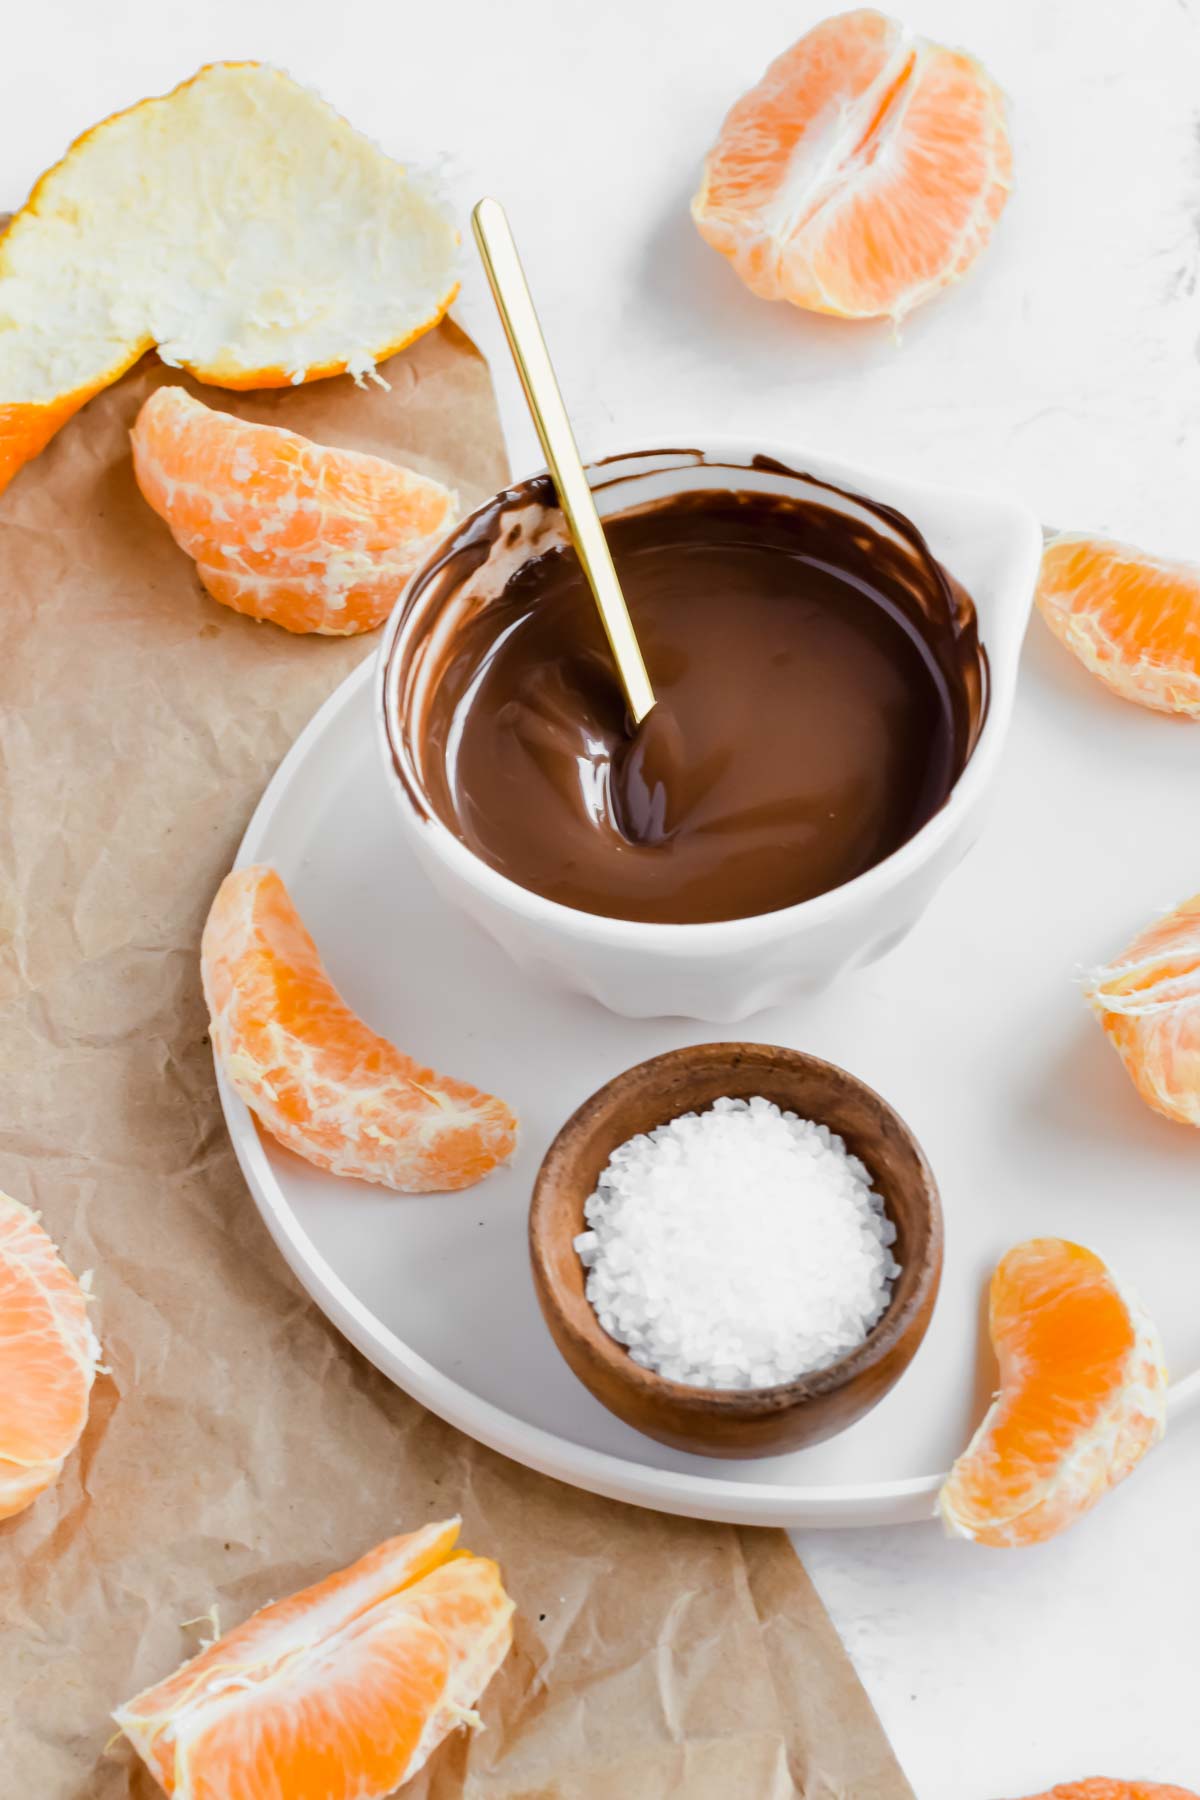 A plate with orange slices, sea salt, and melted chocolate in a bowl.